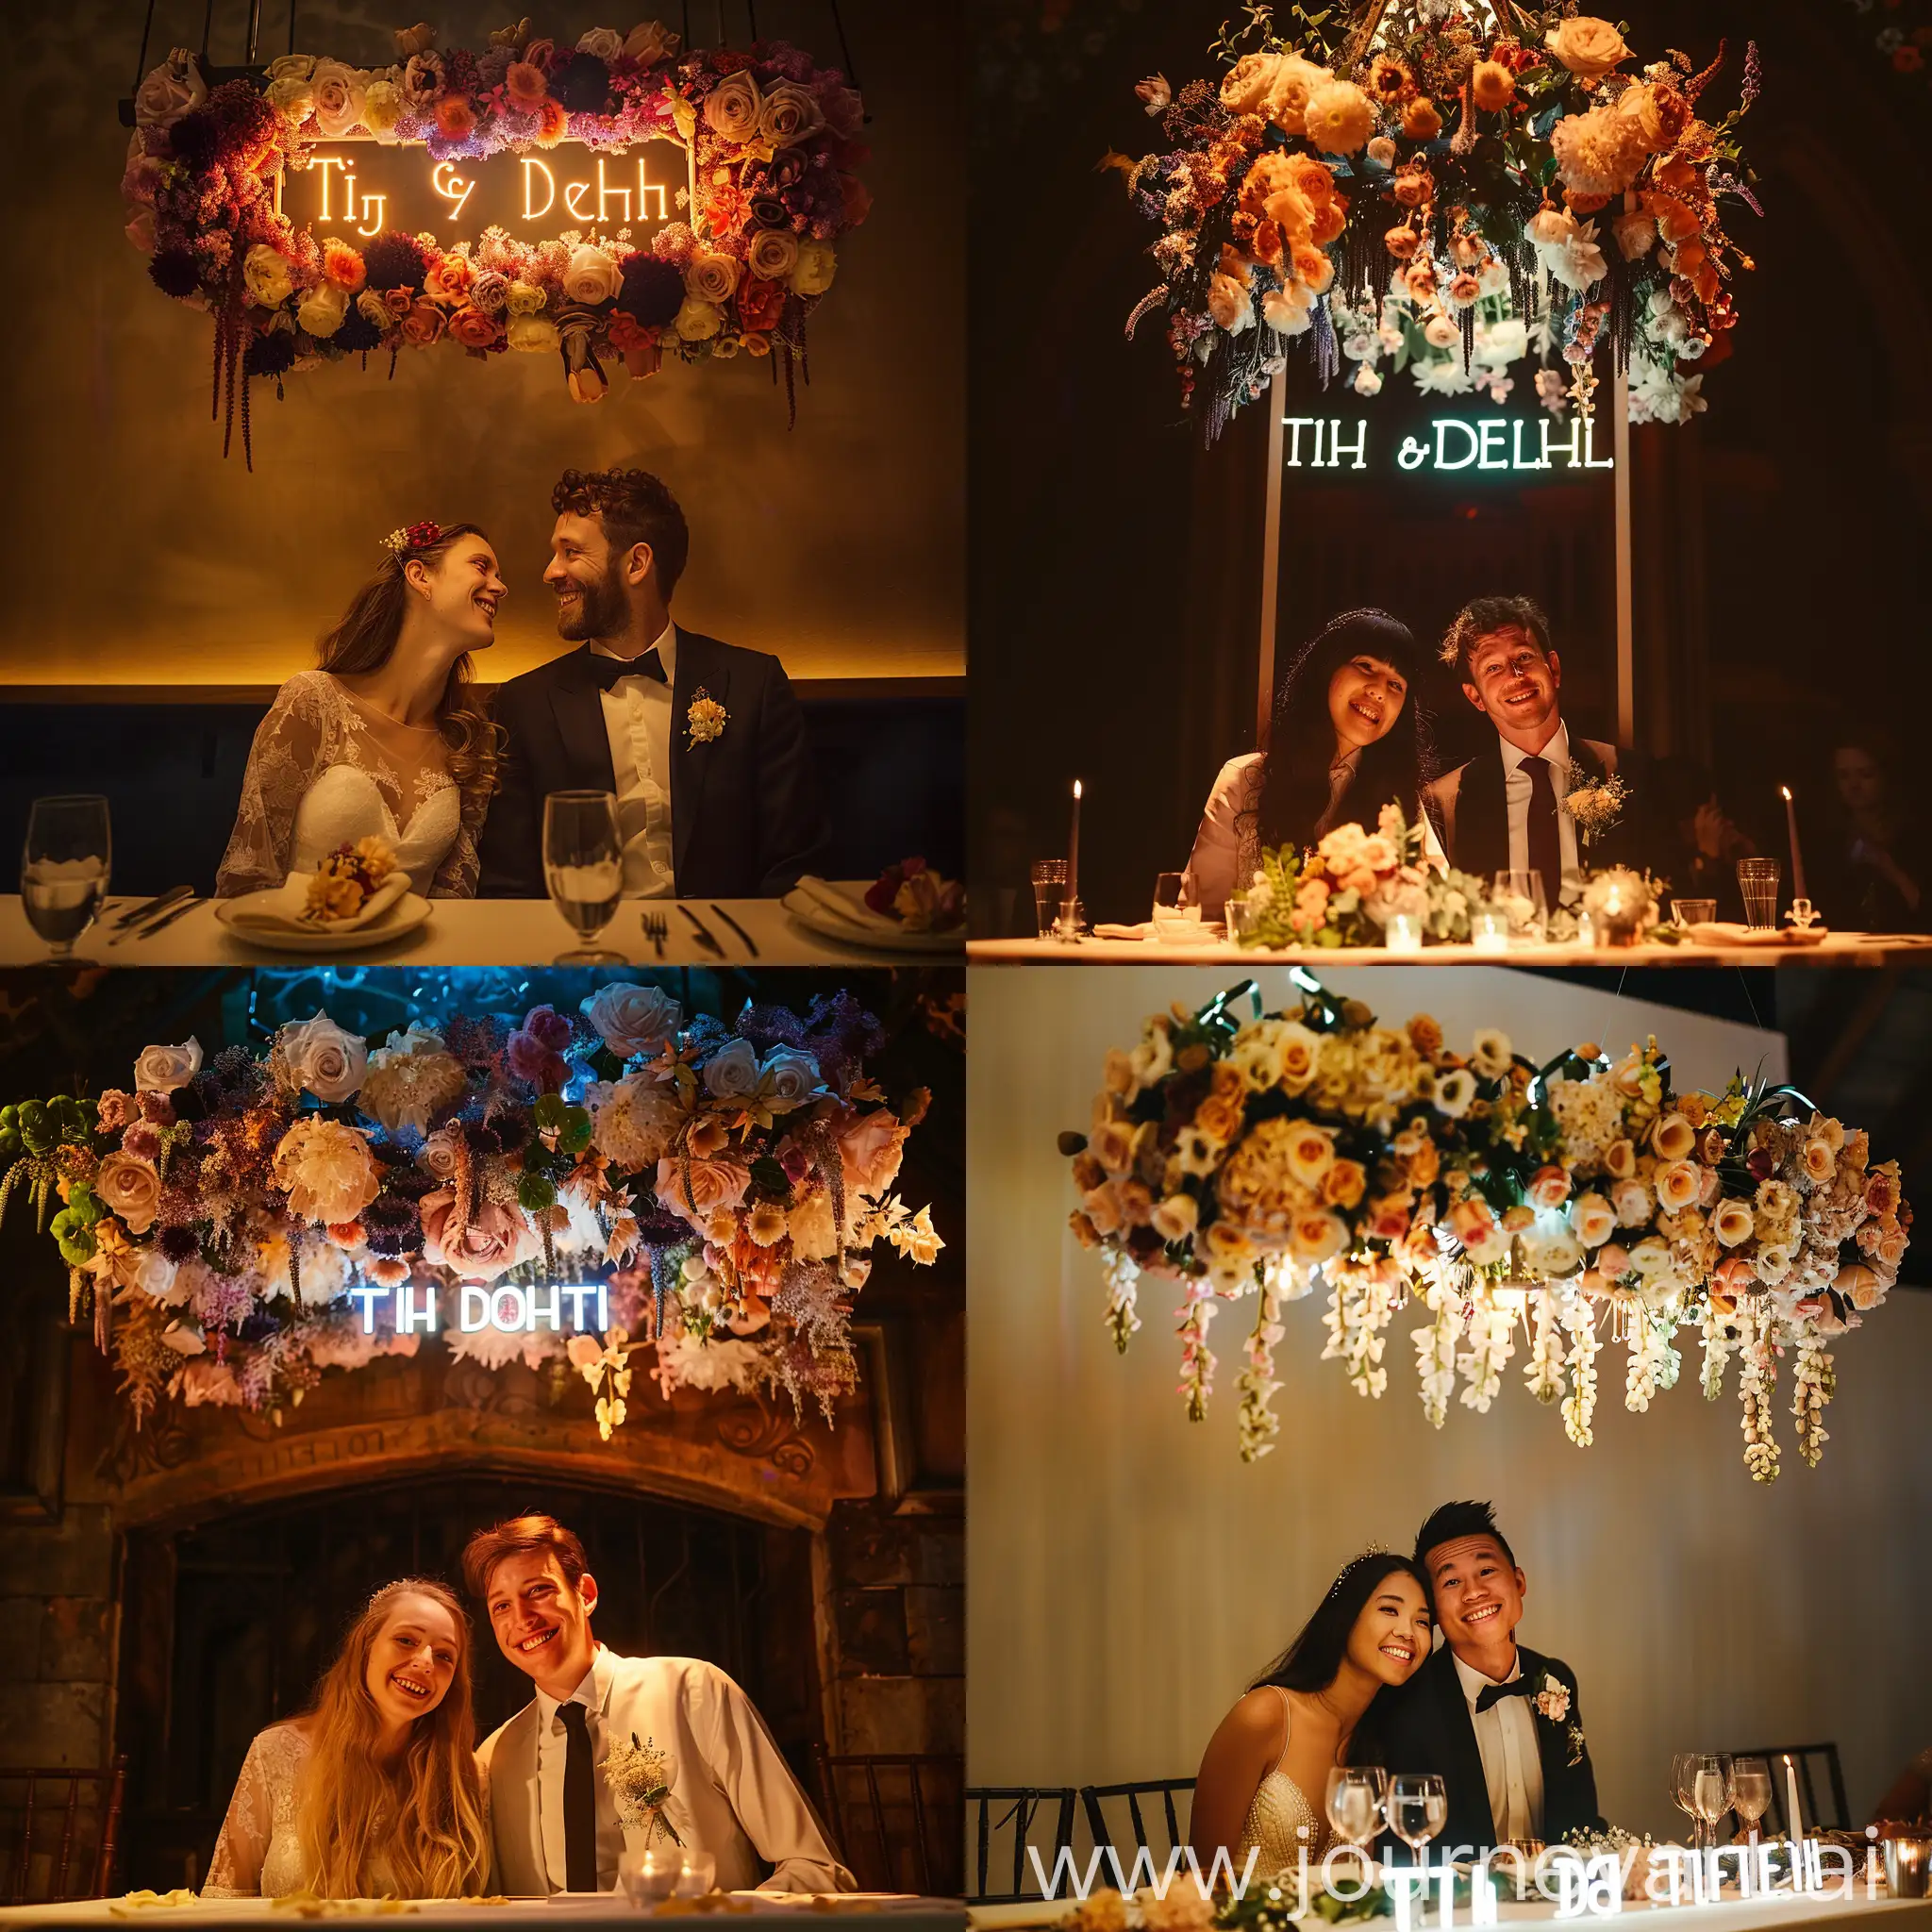 Romantic-Gothic-Wedding-Hall-with-Smiling-Bride-and-Groom